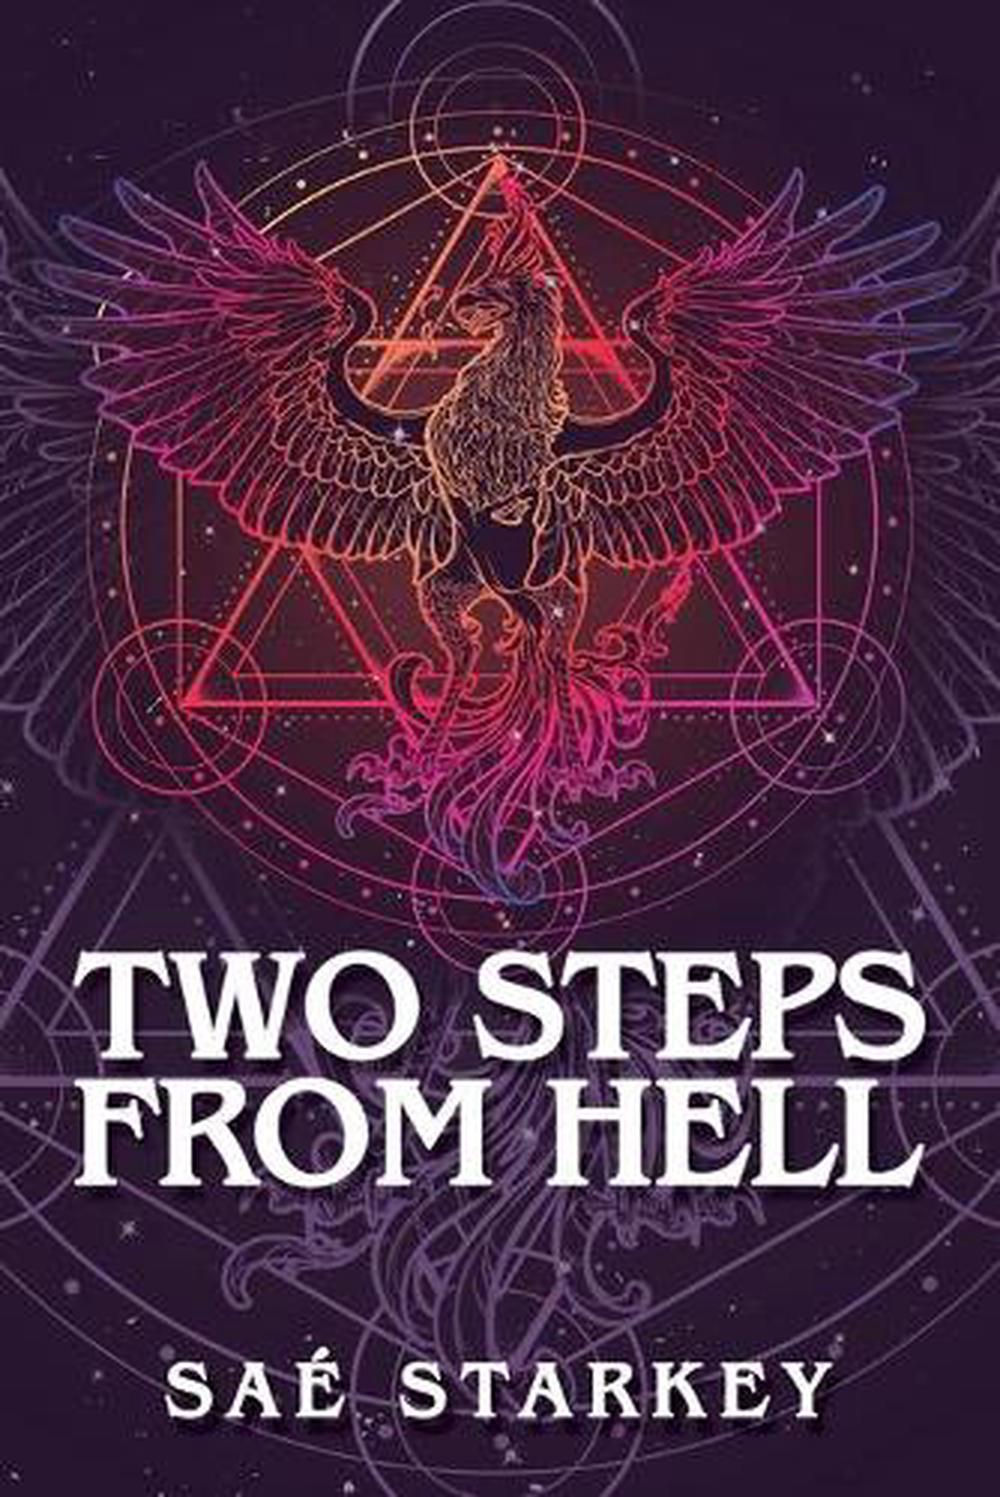 best two steps from hell albums